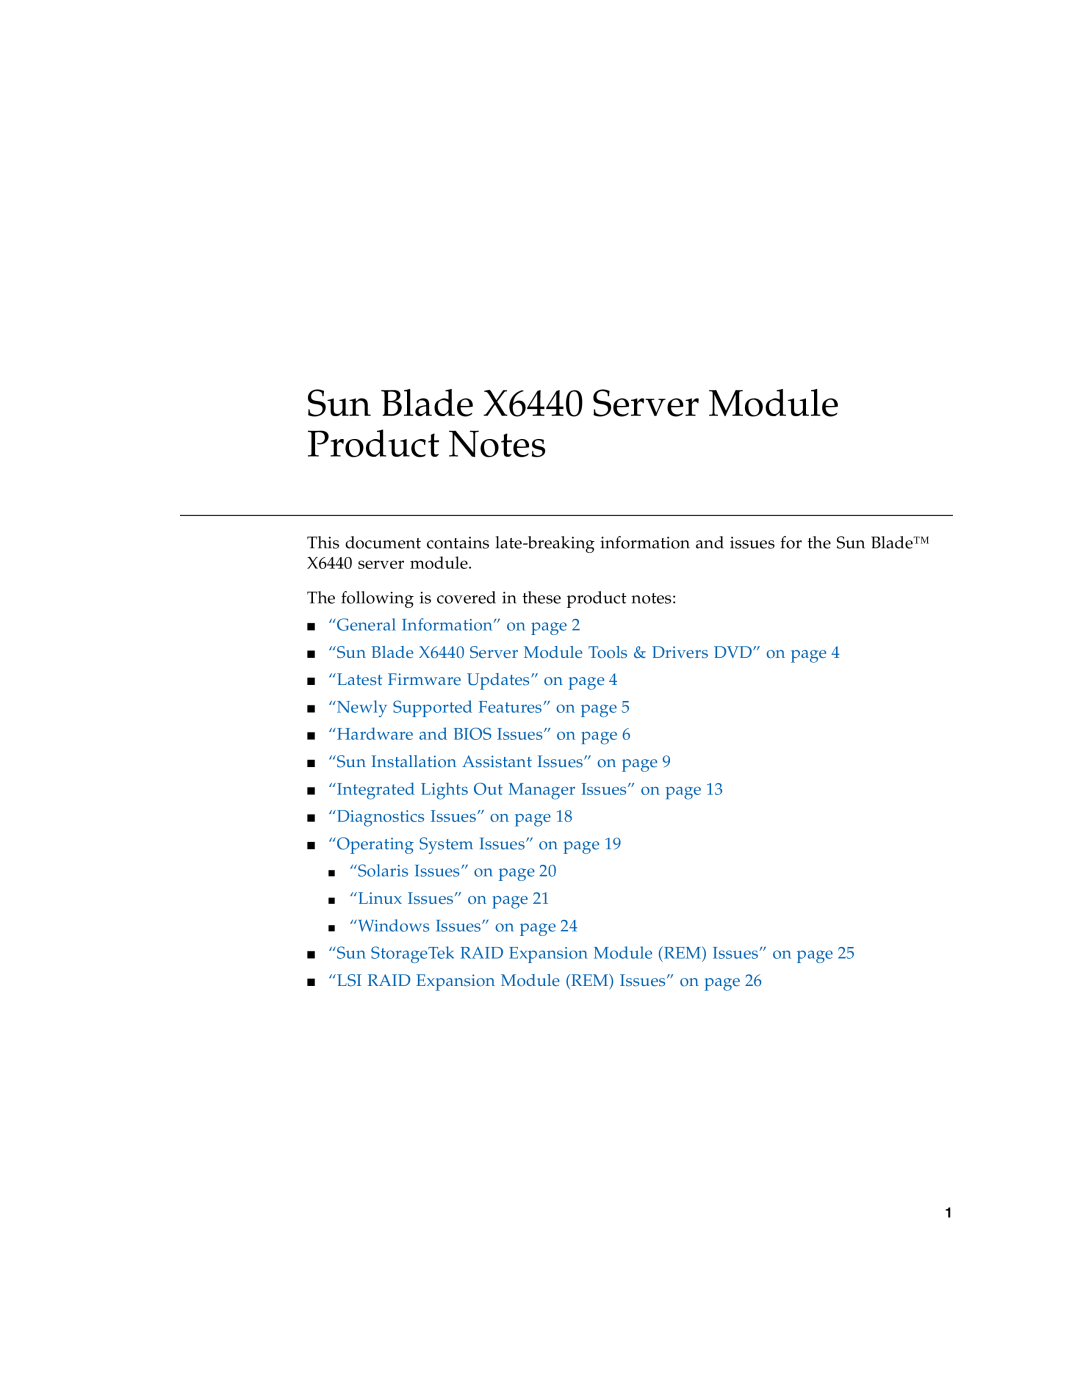 Sun Microsystems manual Sun Blade X6440 Server Module Product Notes, The following is covered in these product notes 